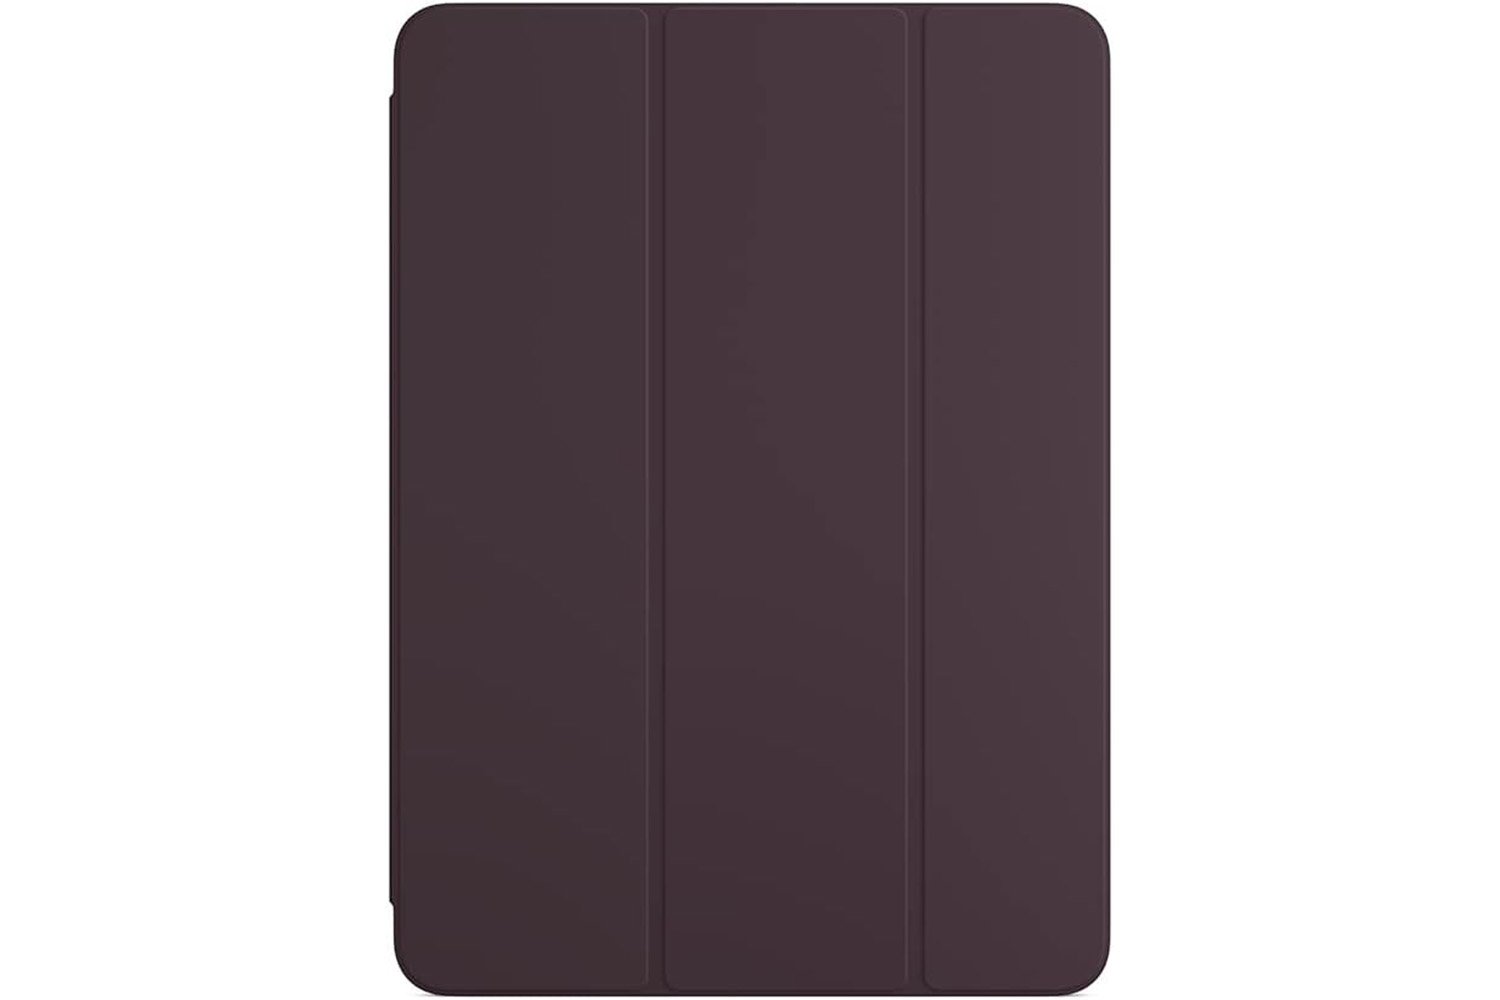 Apple Smart Folio for the iPad Air 5 and iPad Air 4 in Dark Cherry.